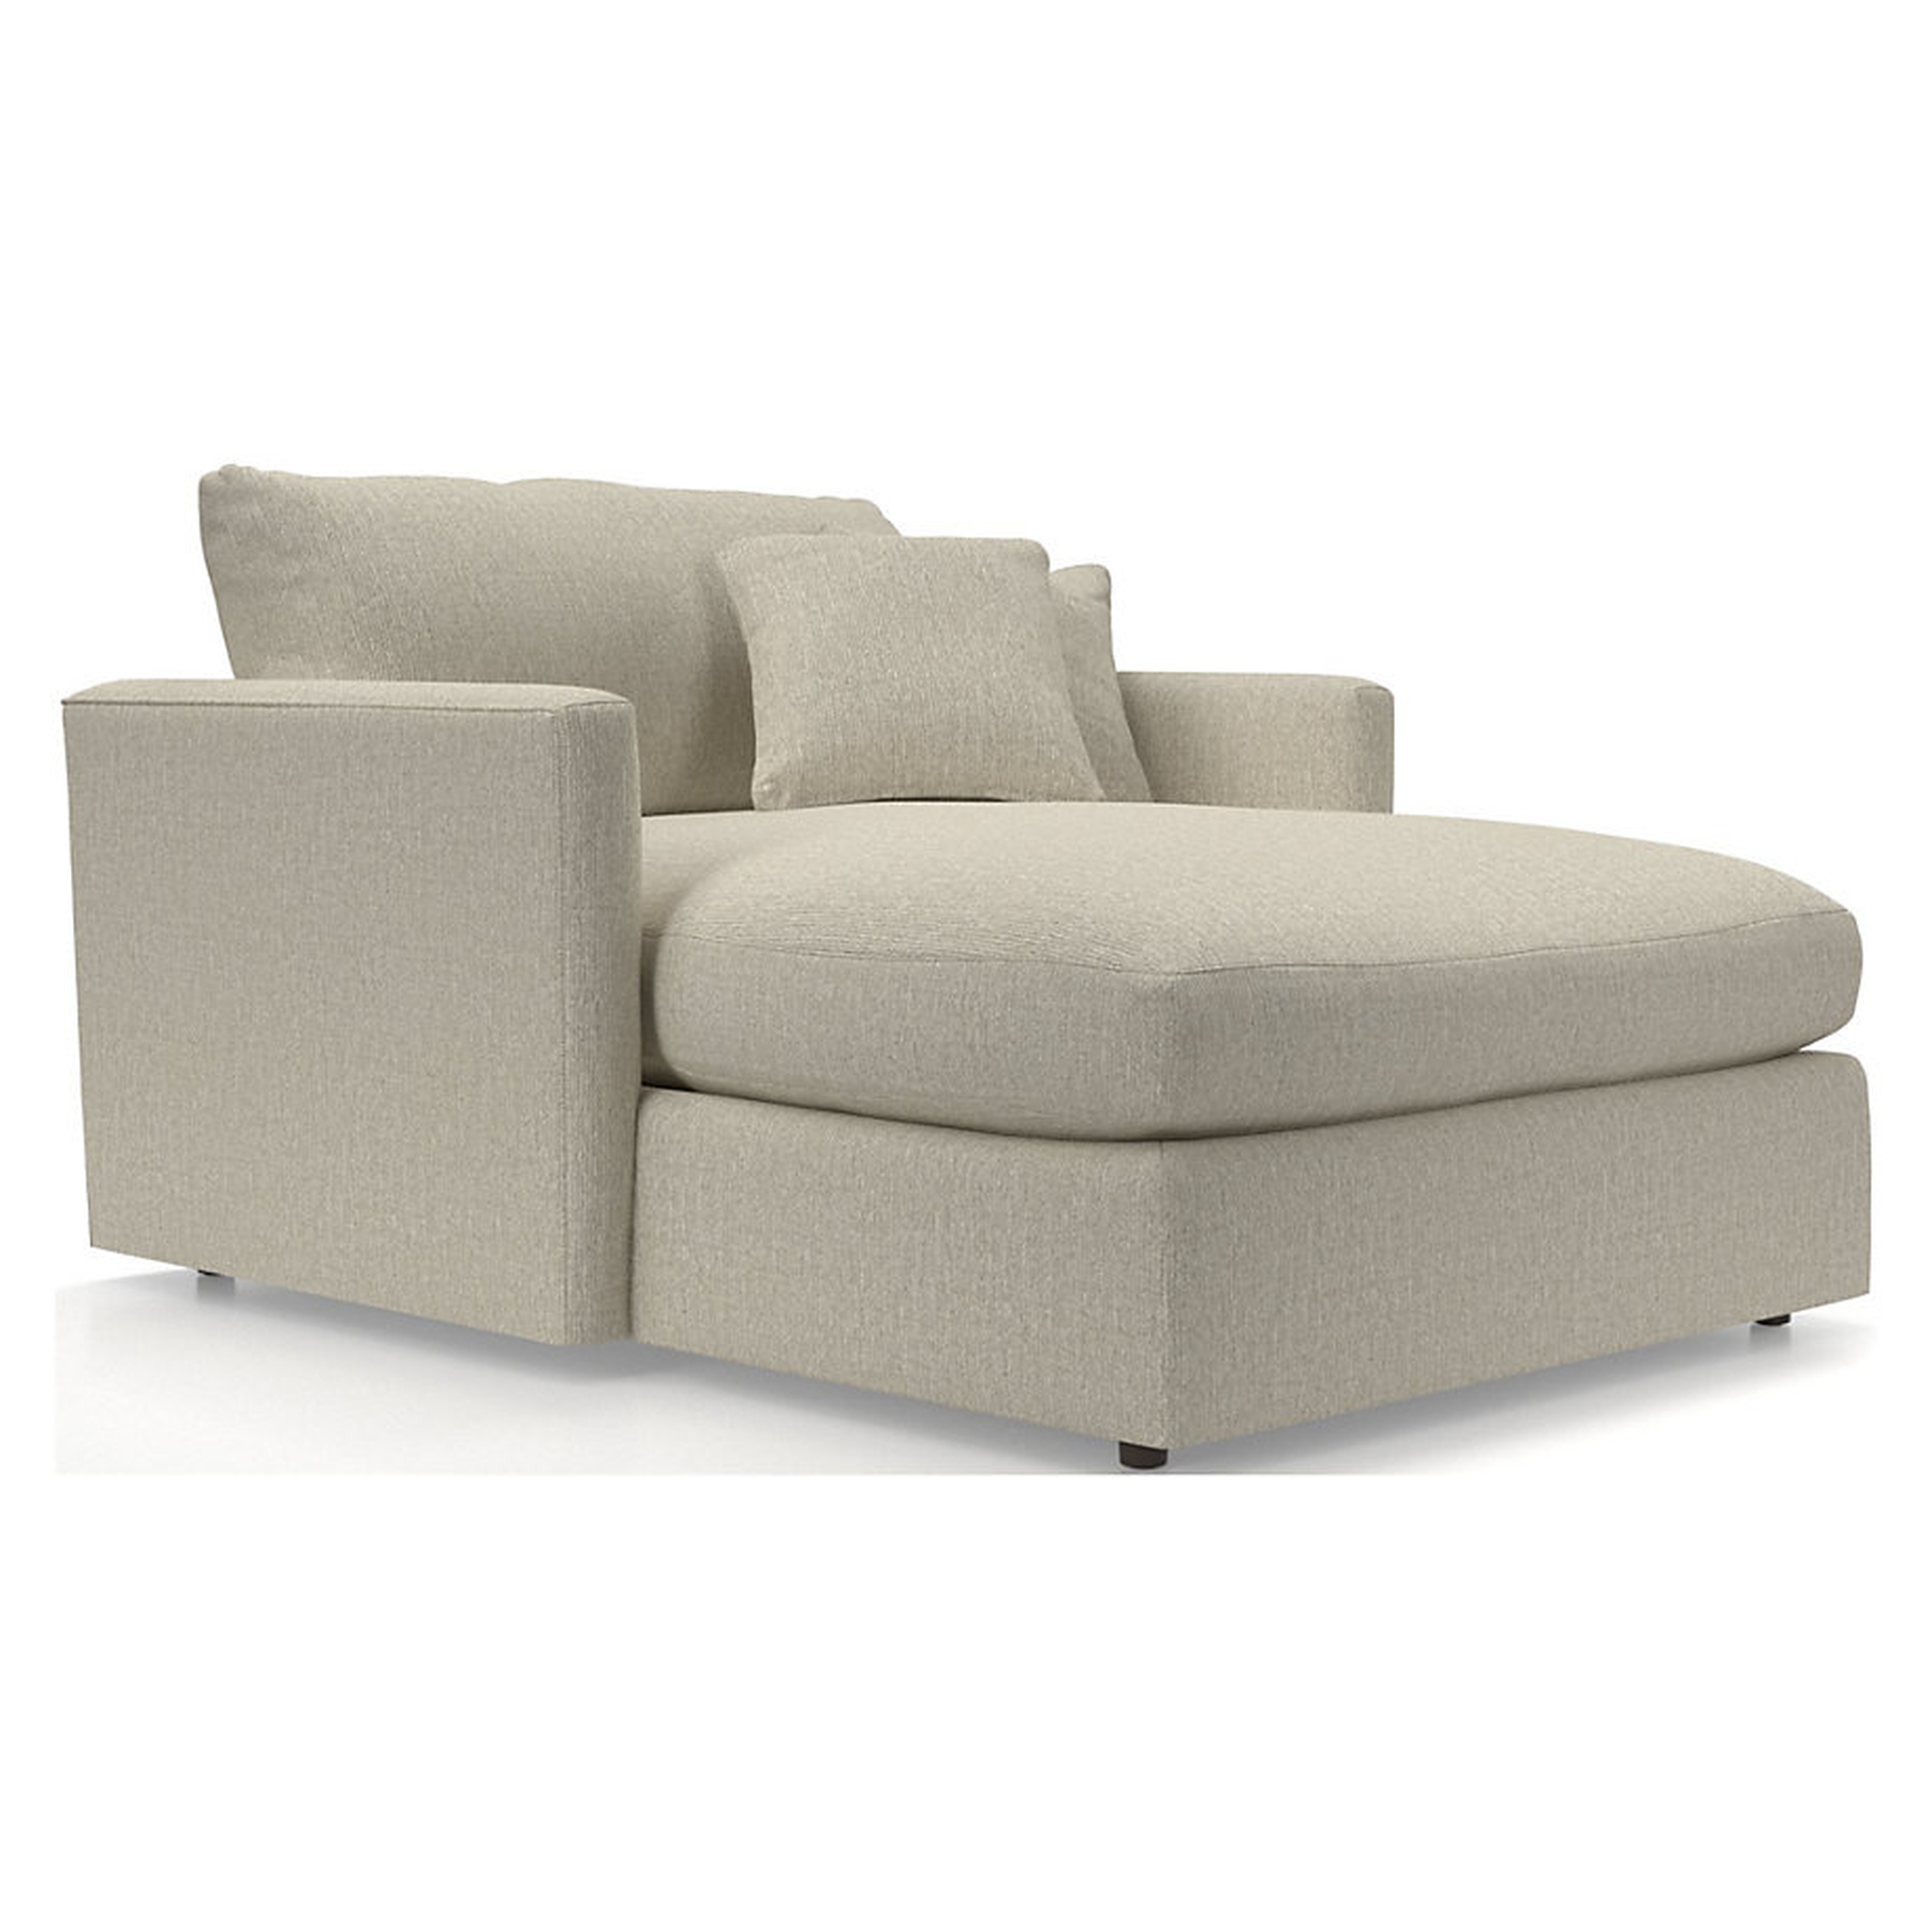 Lounge Deep Chaise Lounge Taft, Pearl - Crate and Barrel